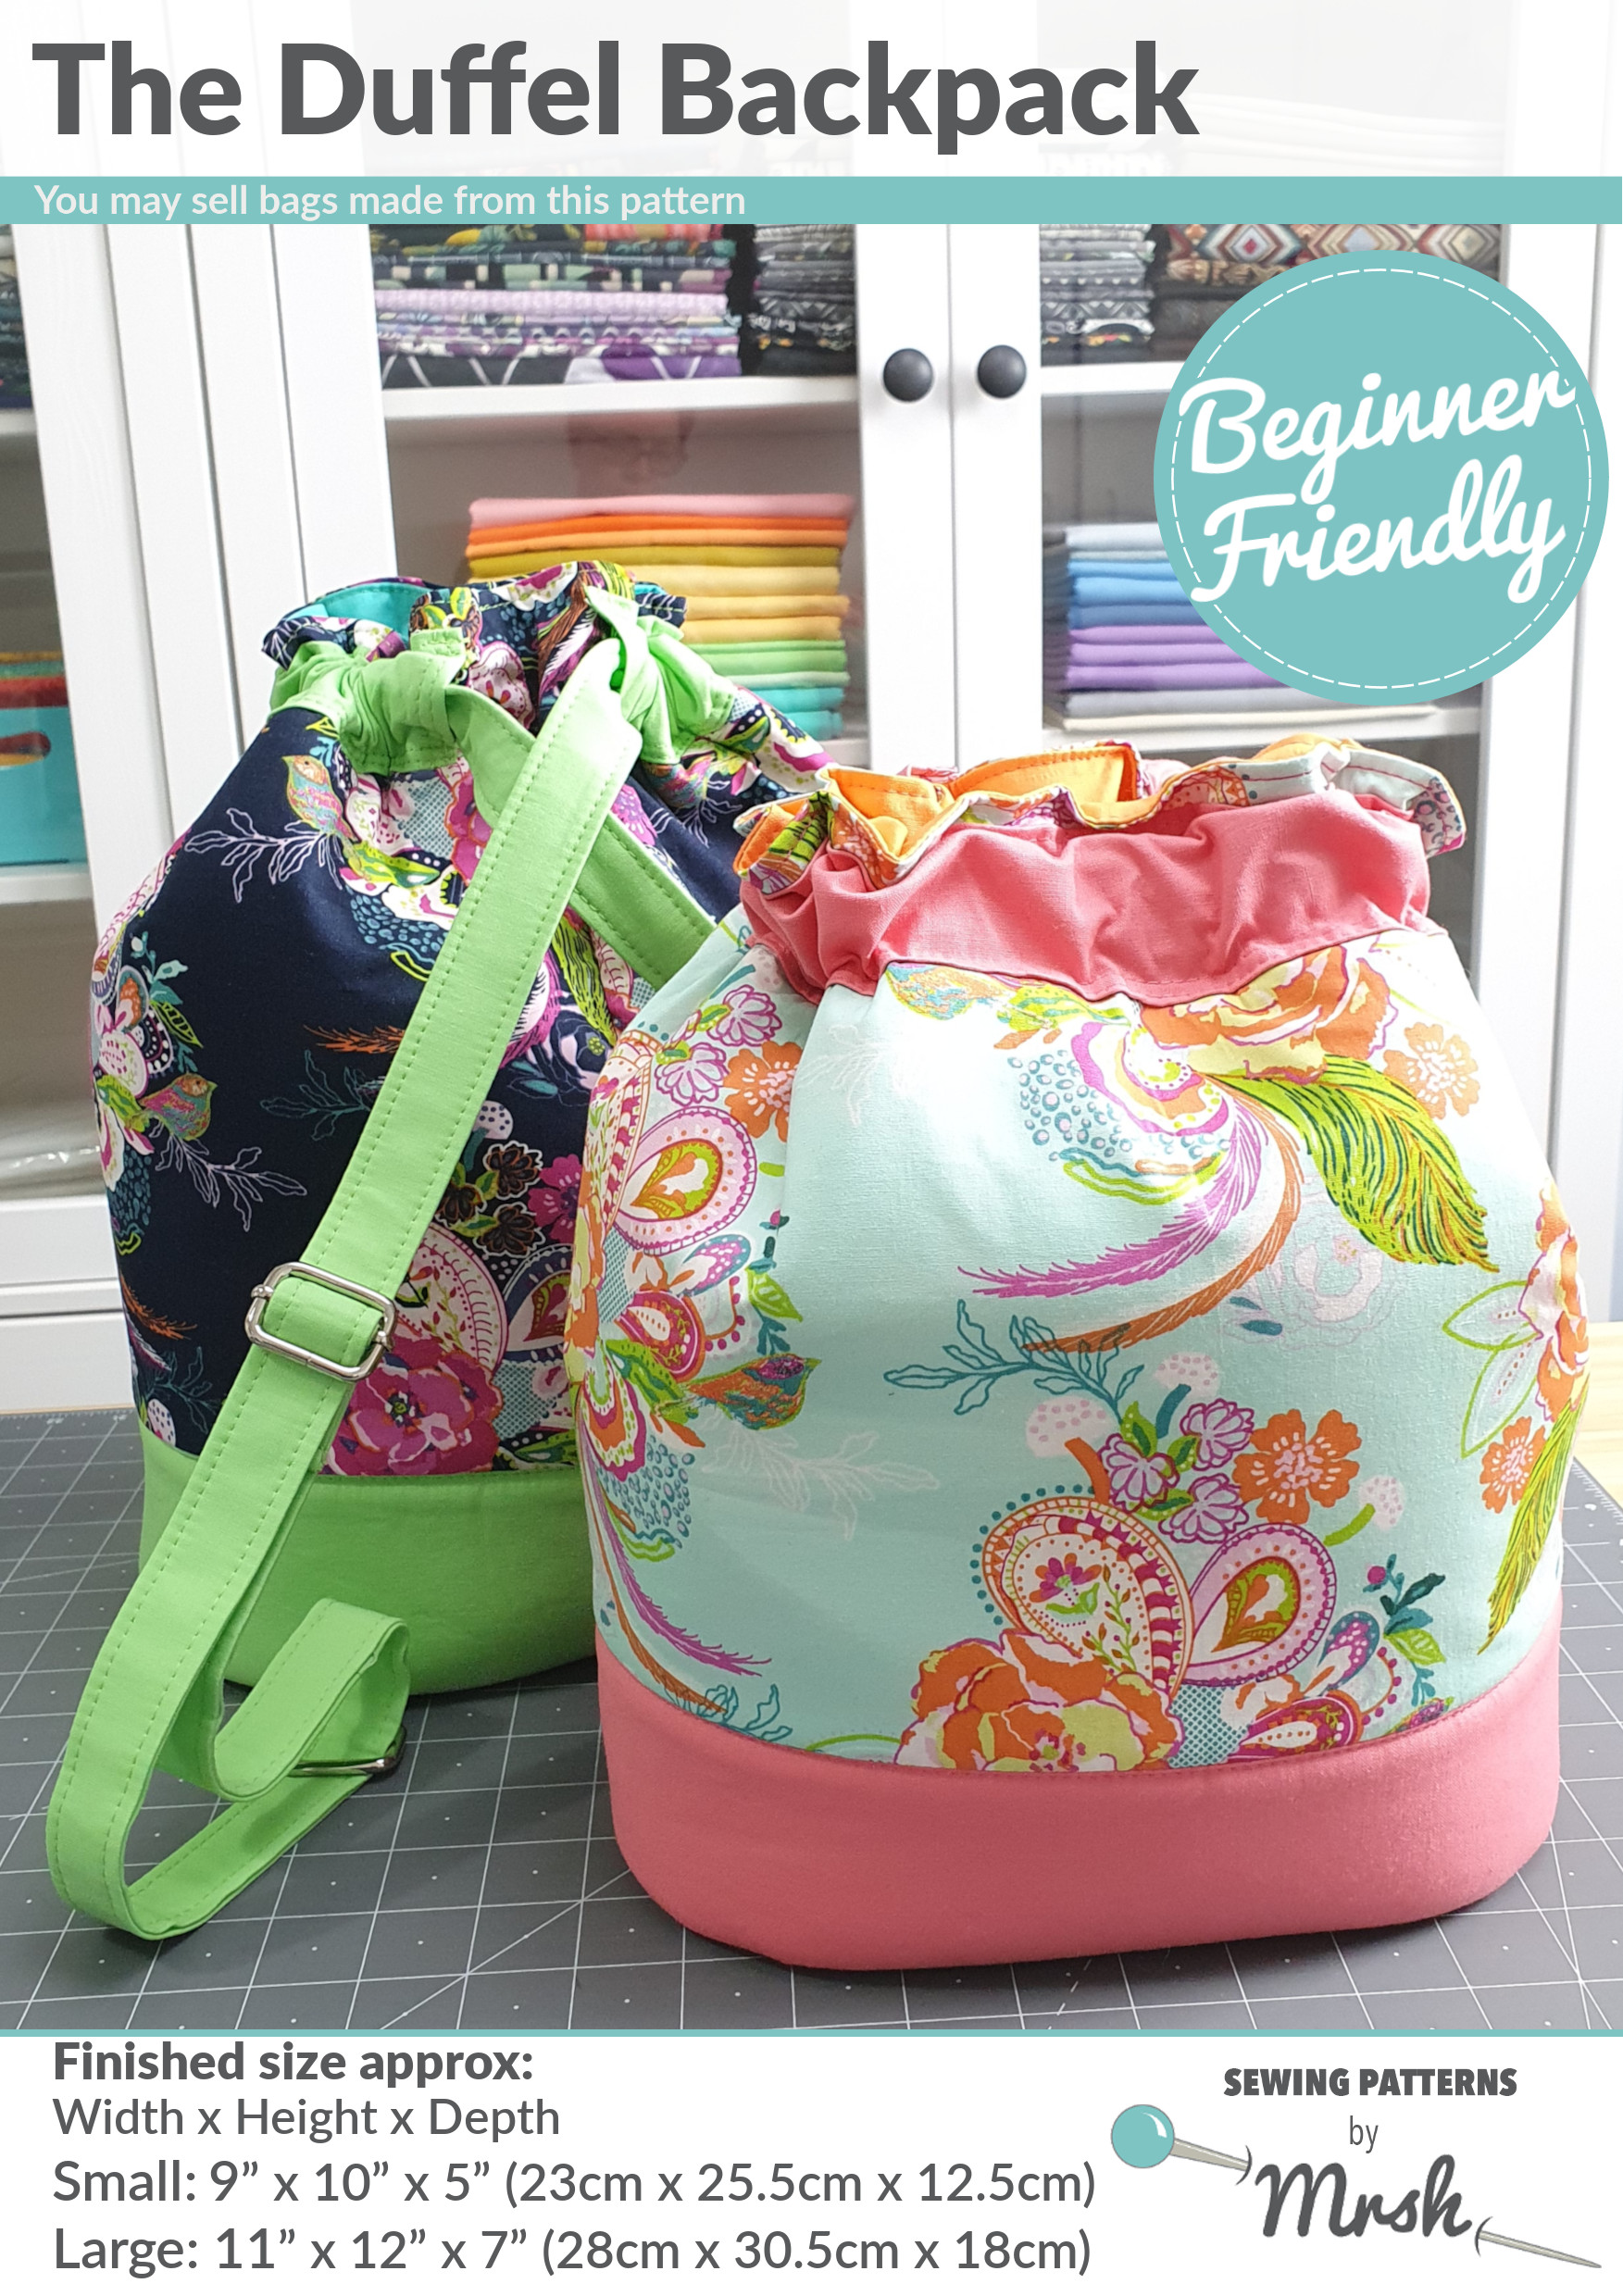 The Duffel Backpack sewing pattern - front cover